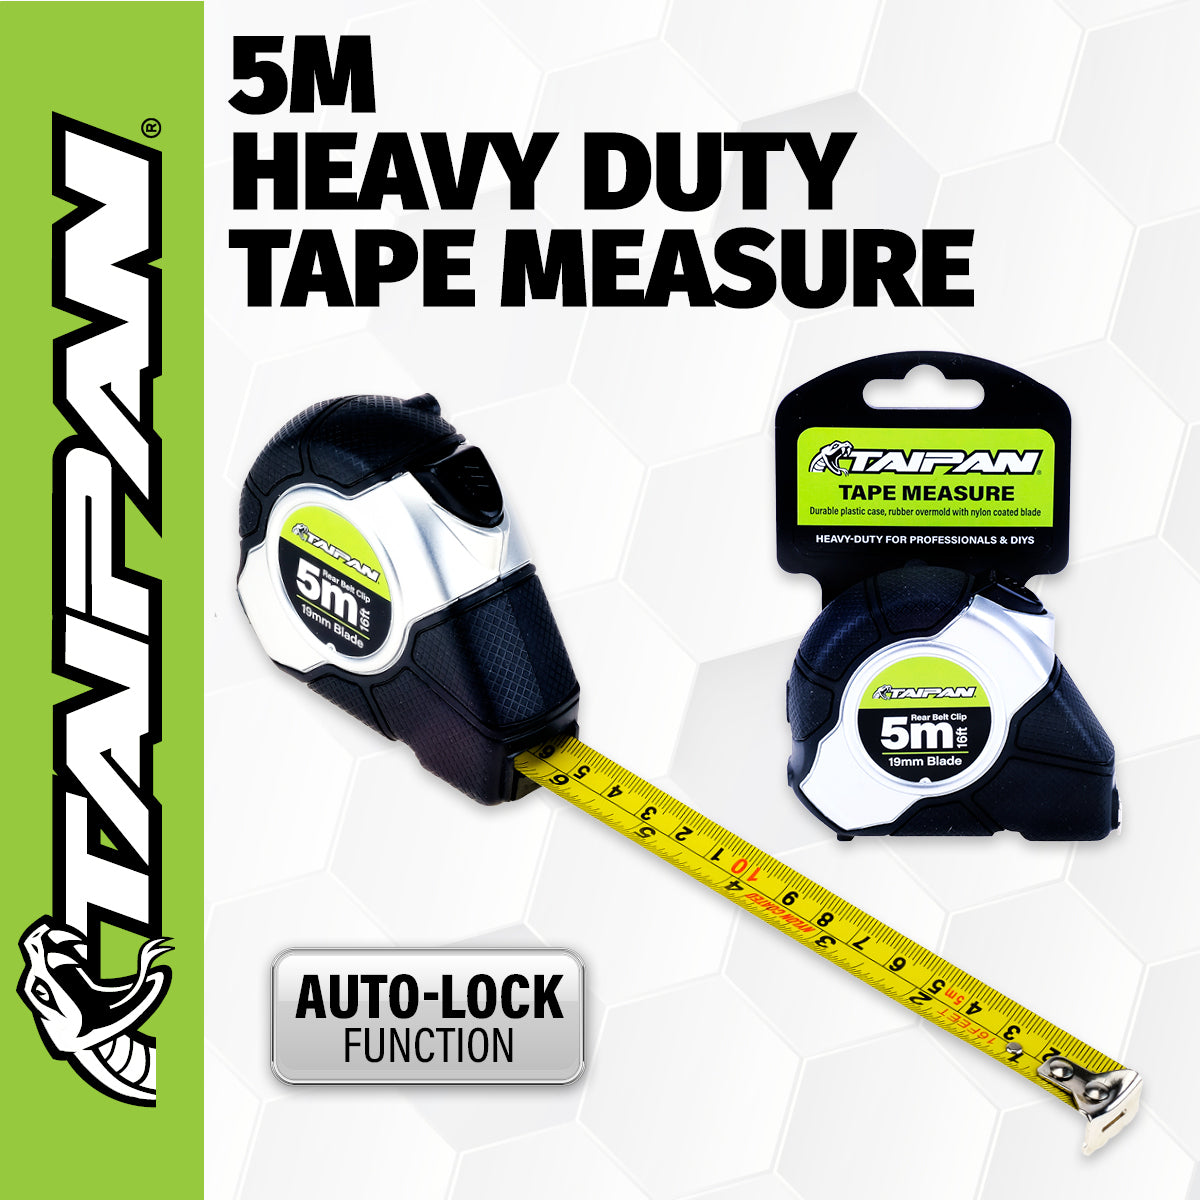 Taipan 5m Tape Measure Auto Lock Function Shock Absorbent Rubber Case